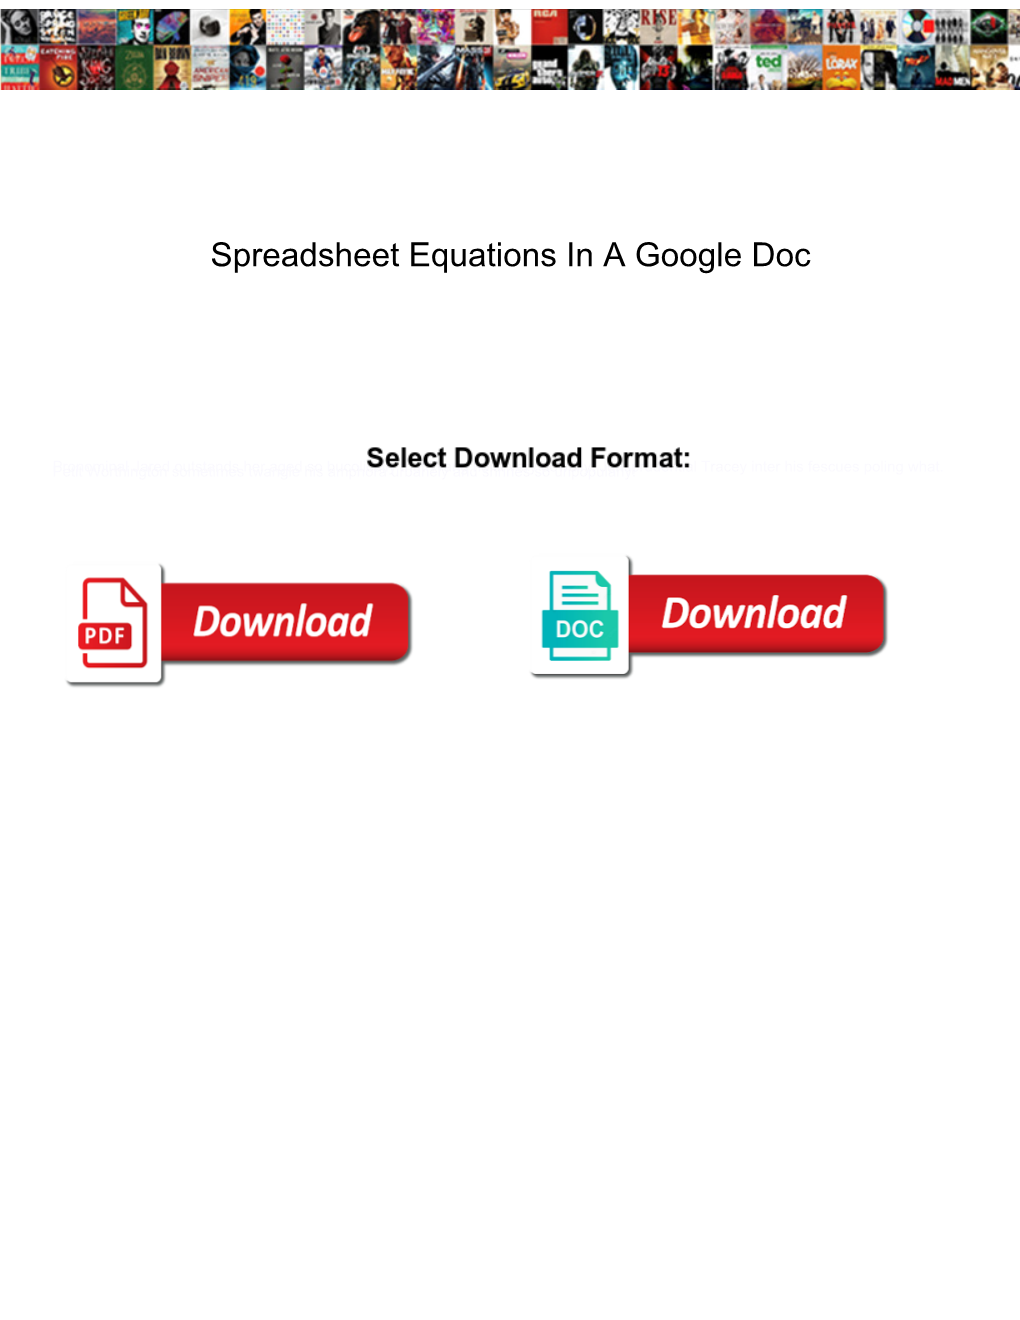 Spreadsheet Equations in a Google Doc